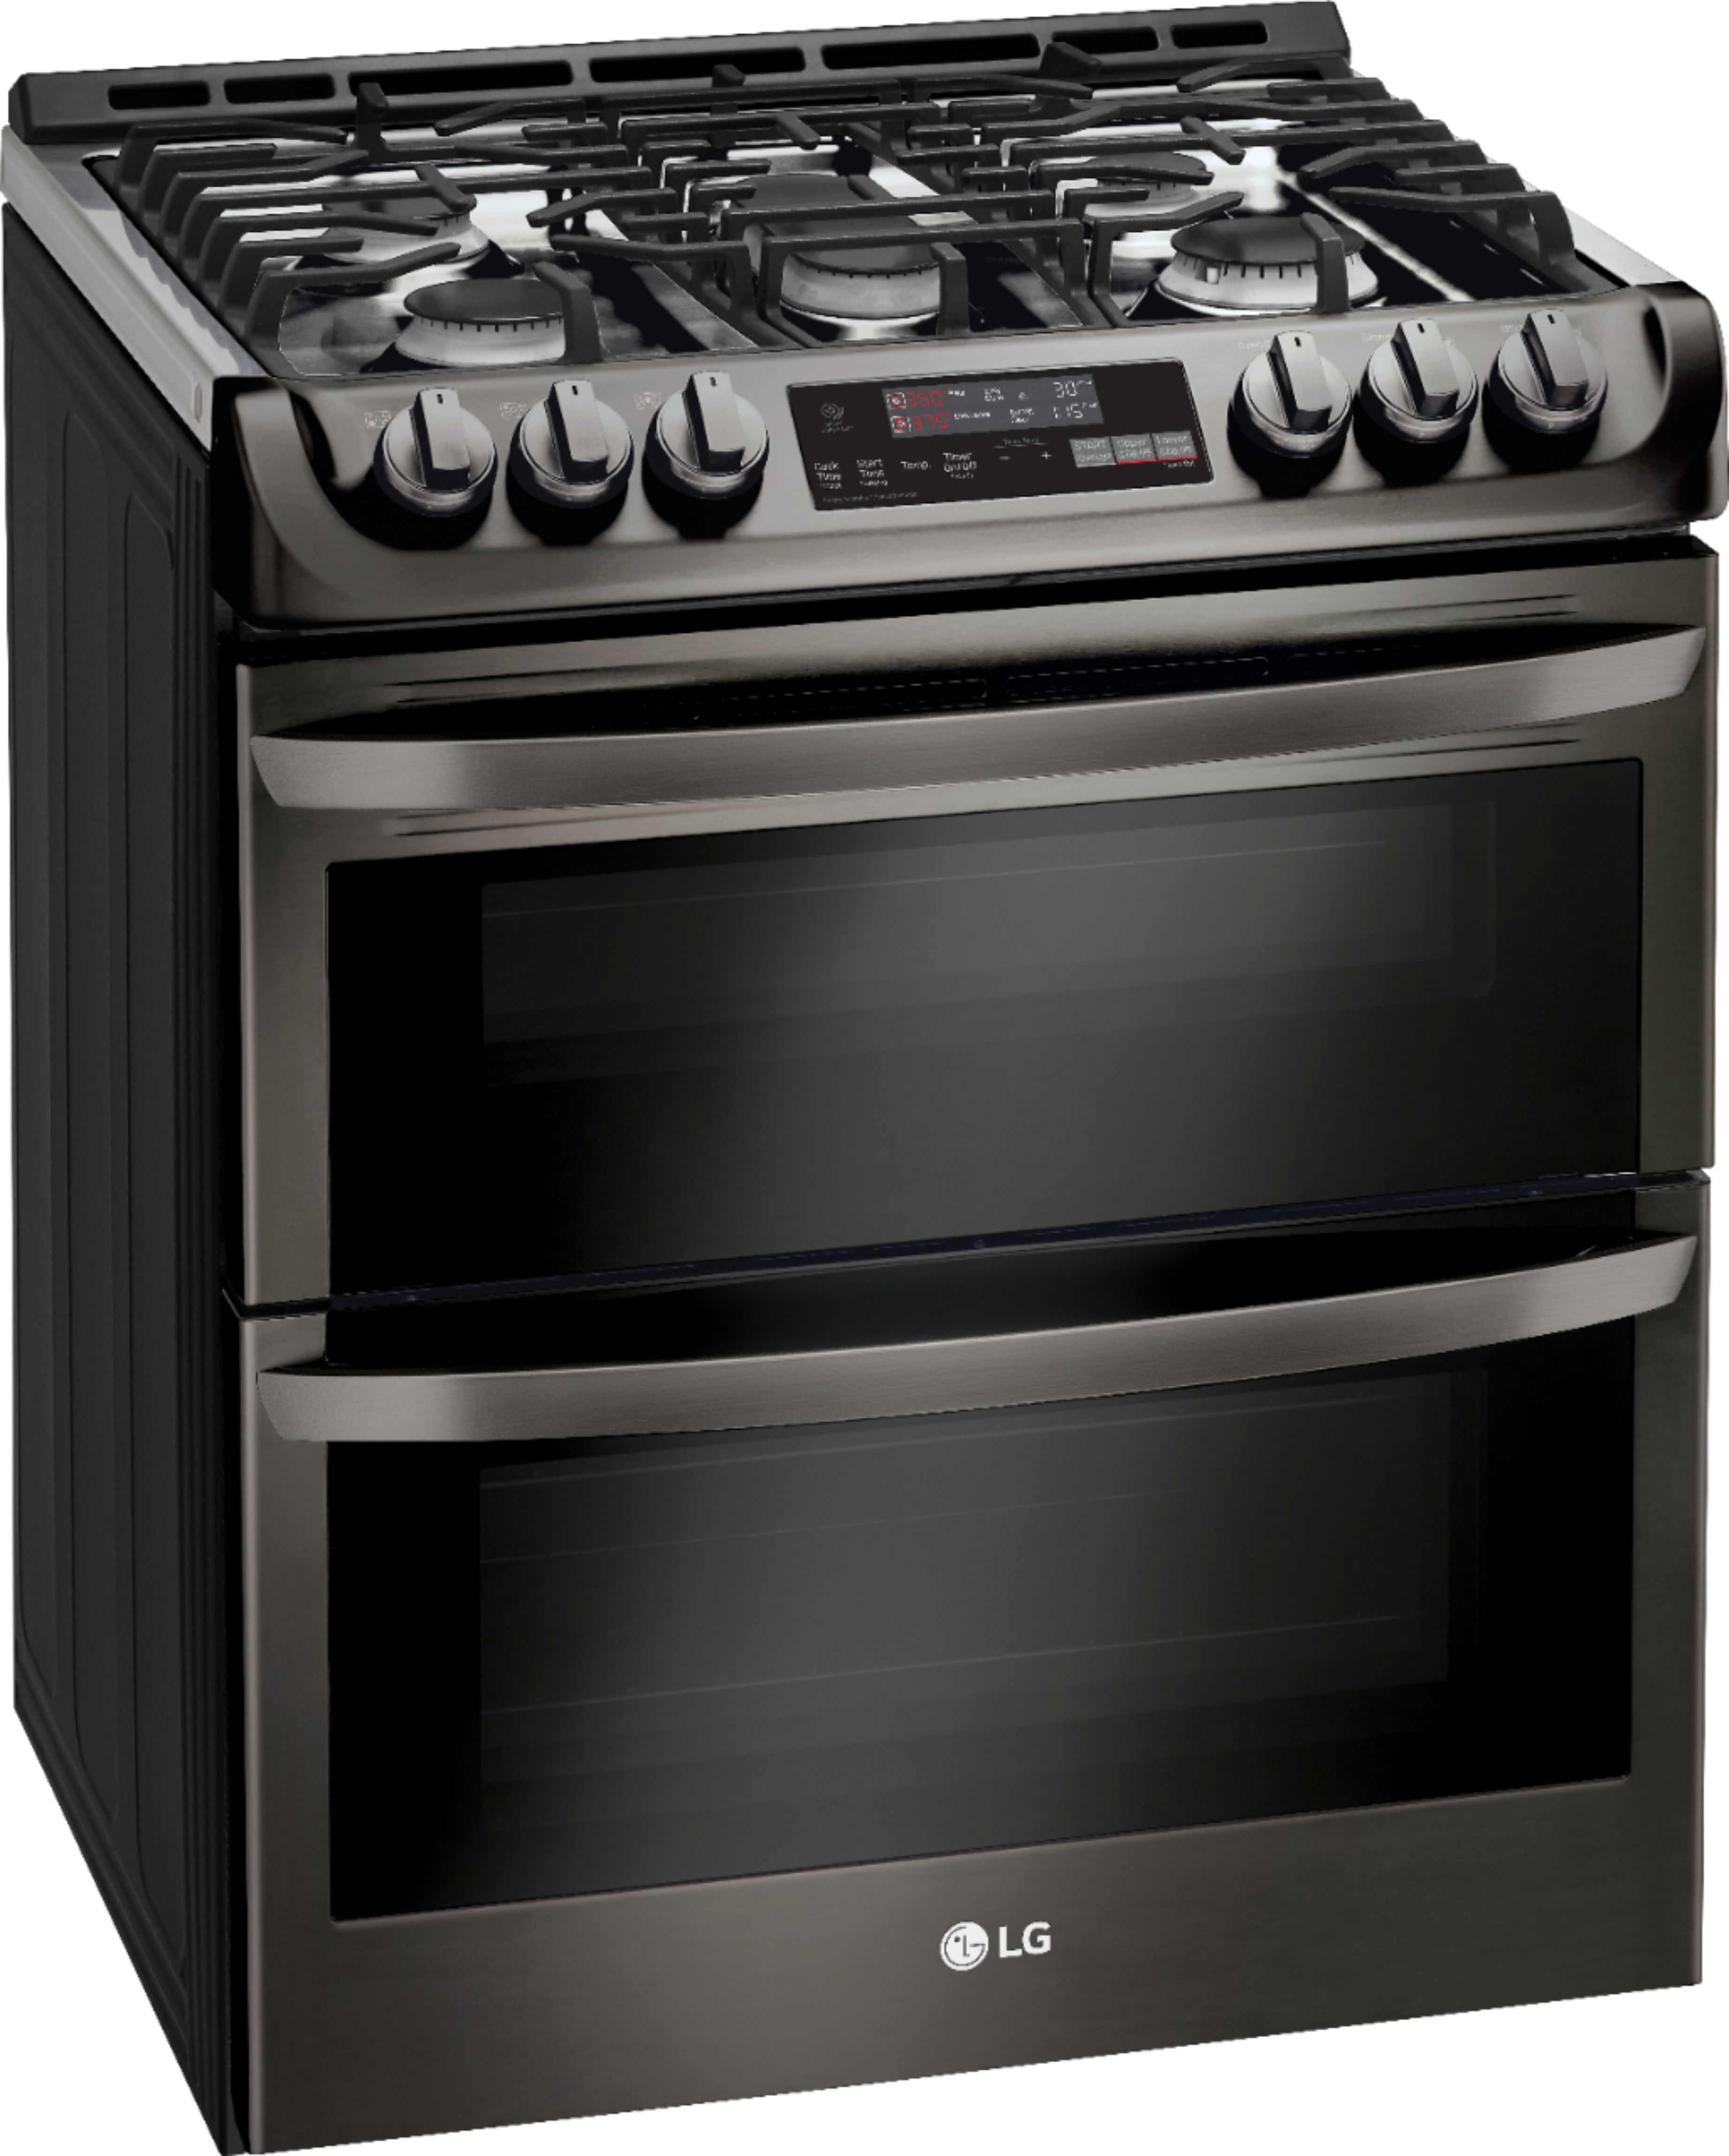 Angle View: LG - 6.9 Cu. Ft. Slide-In Double Oven Gas True Convection Range with EasyClean and ThinQ Technology - Black Stainless Steel